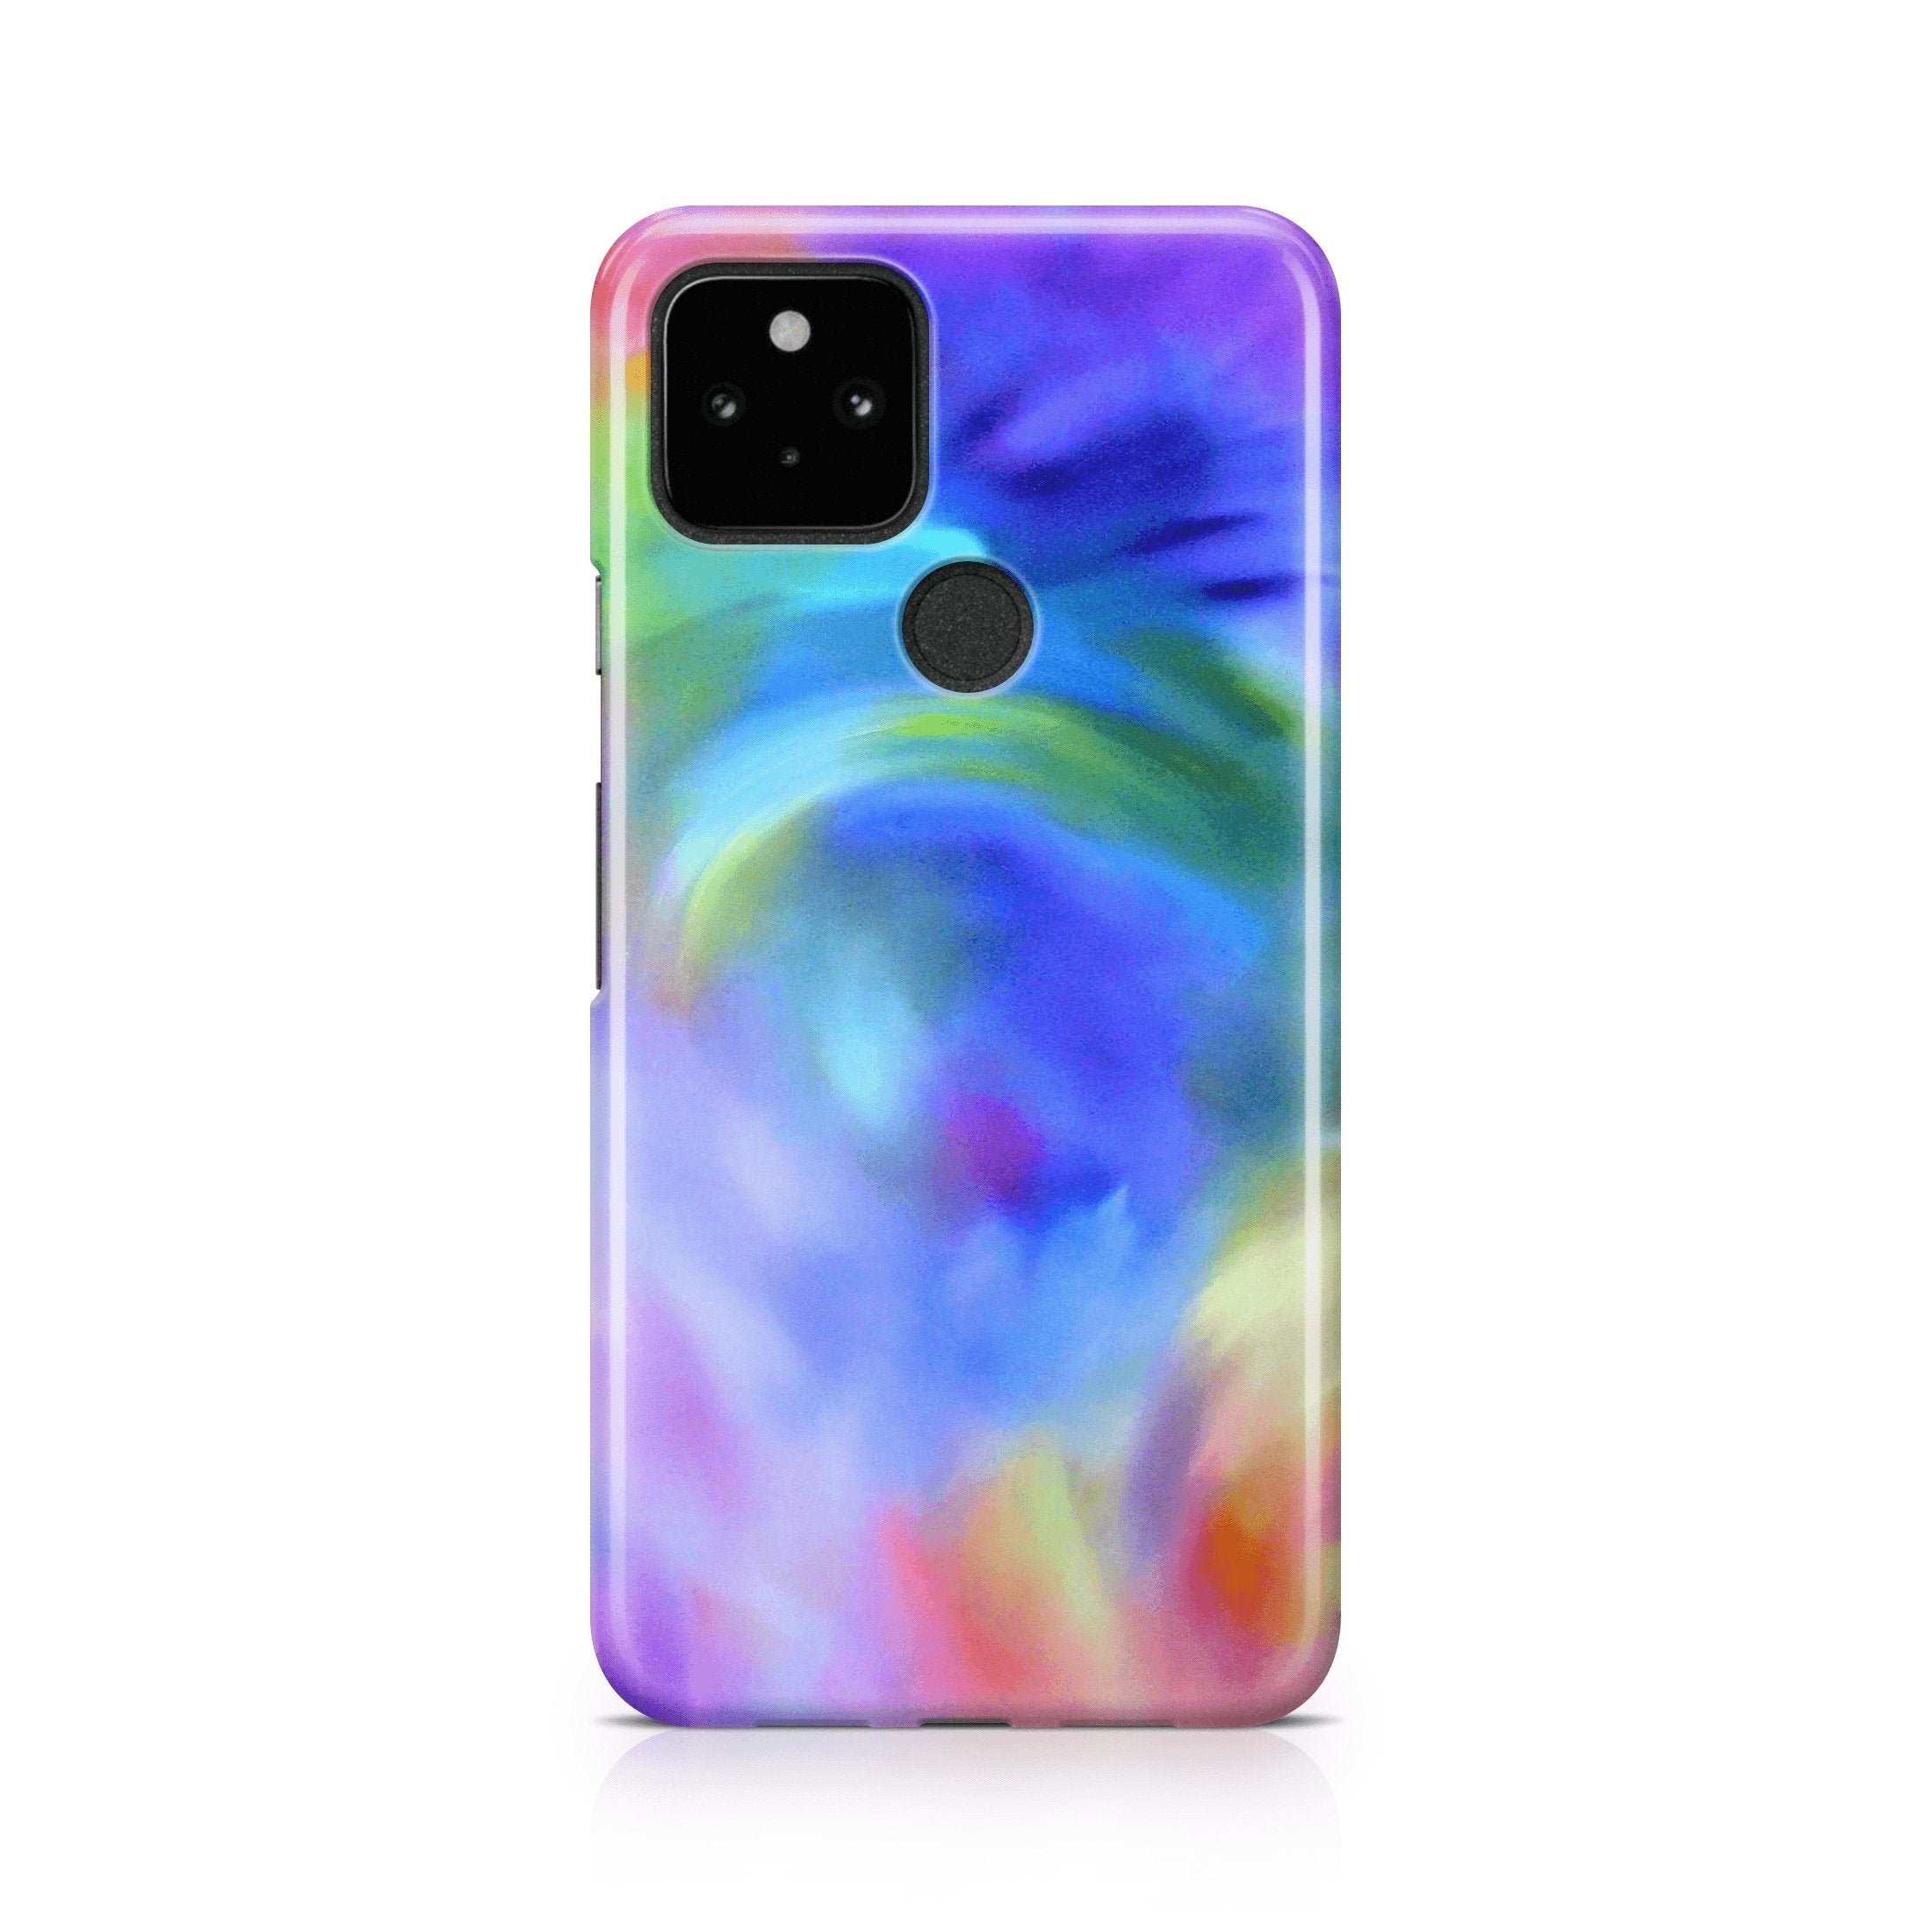 Multicolor Watercolor - Google phone case designs by CaseSwagger